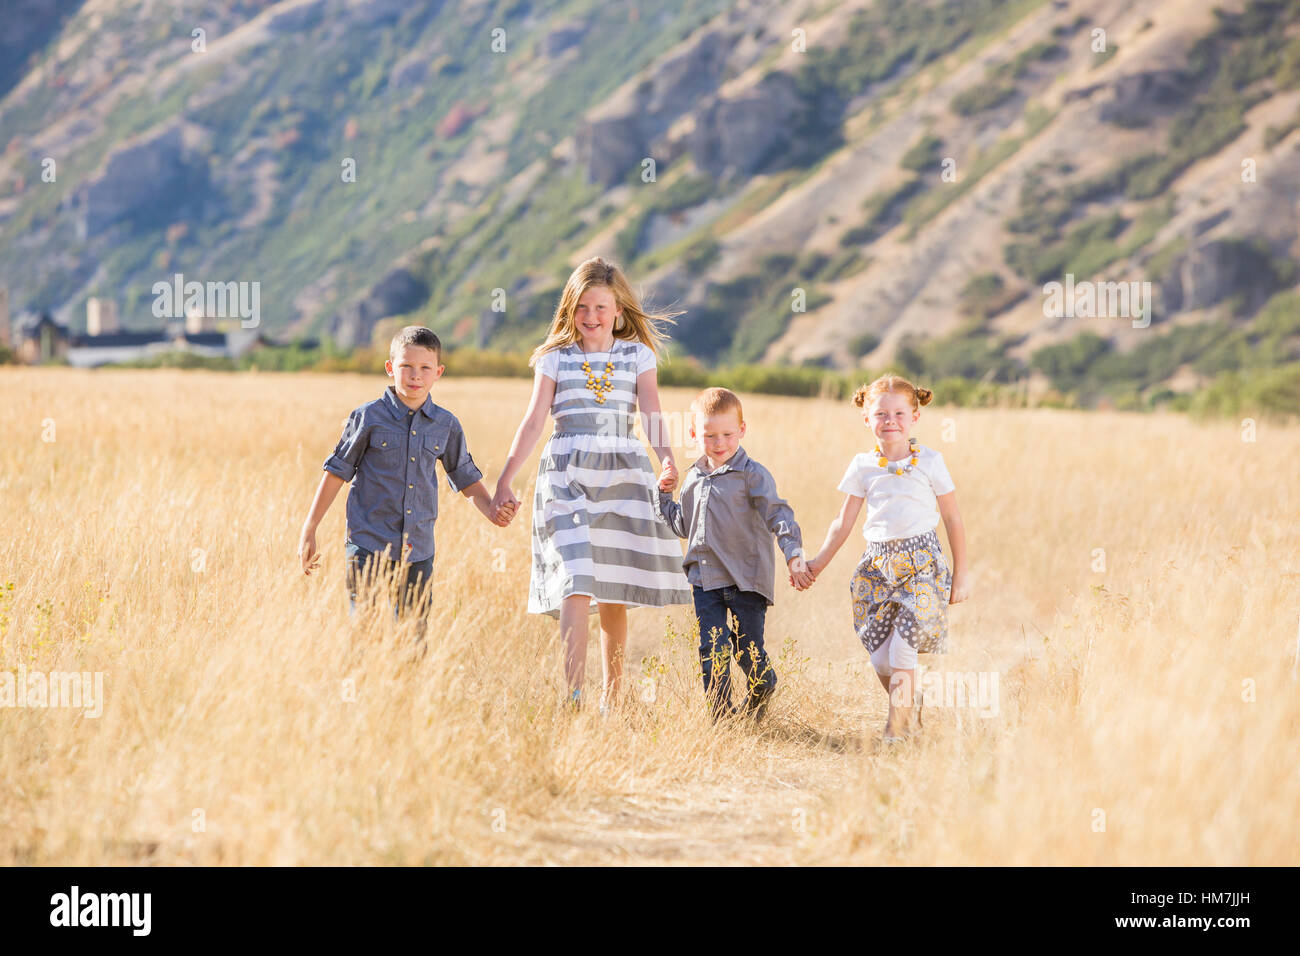 USA, Utah, Provo, Boys and girls (4-5, 6-7, 8-9) walking in field, holding hands Stock Photo